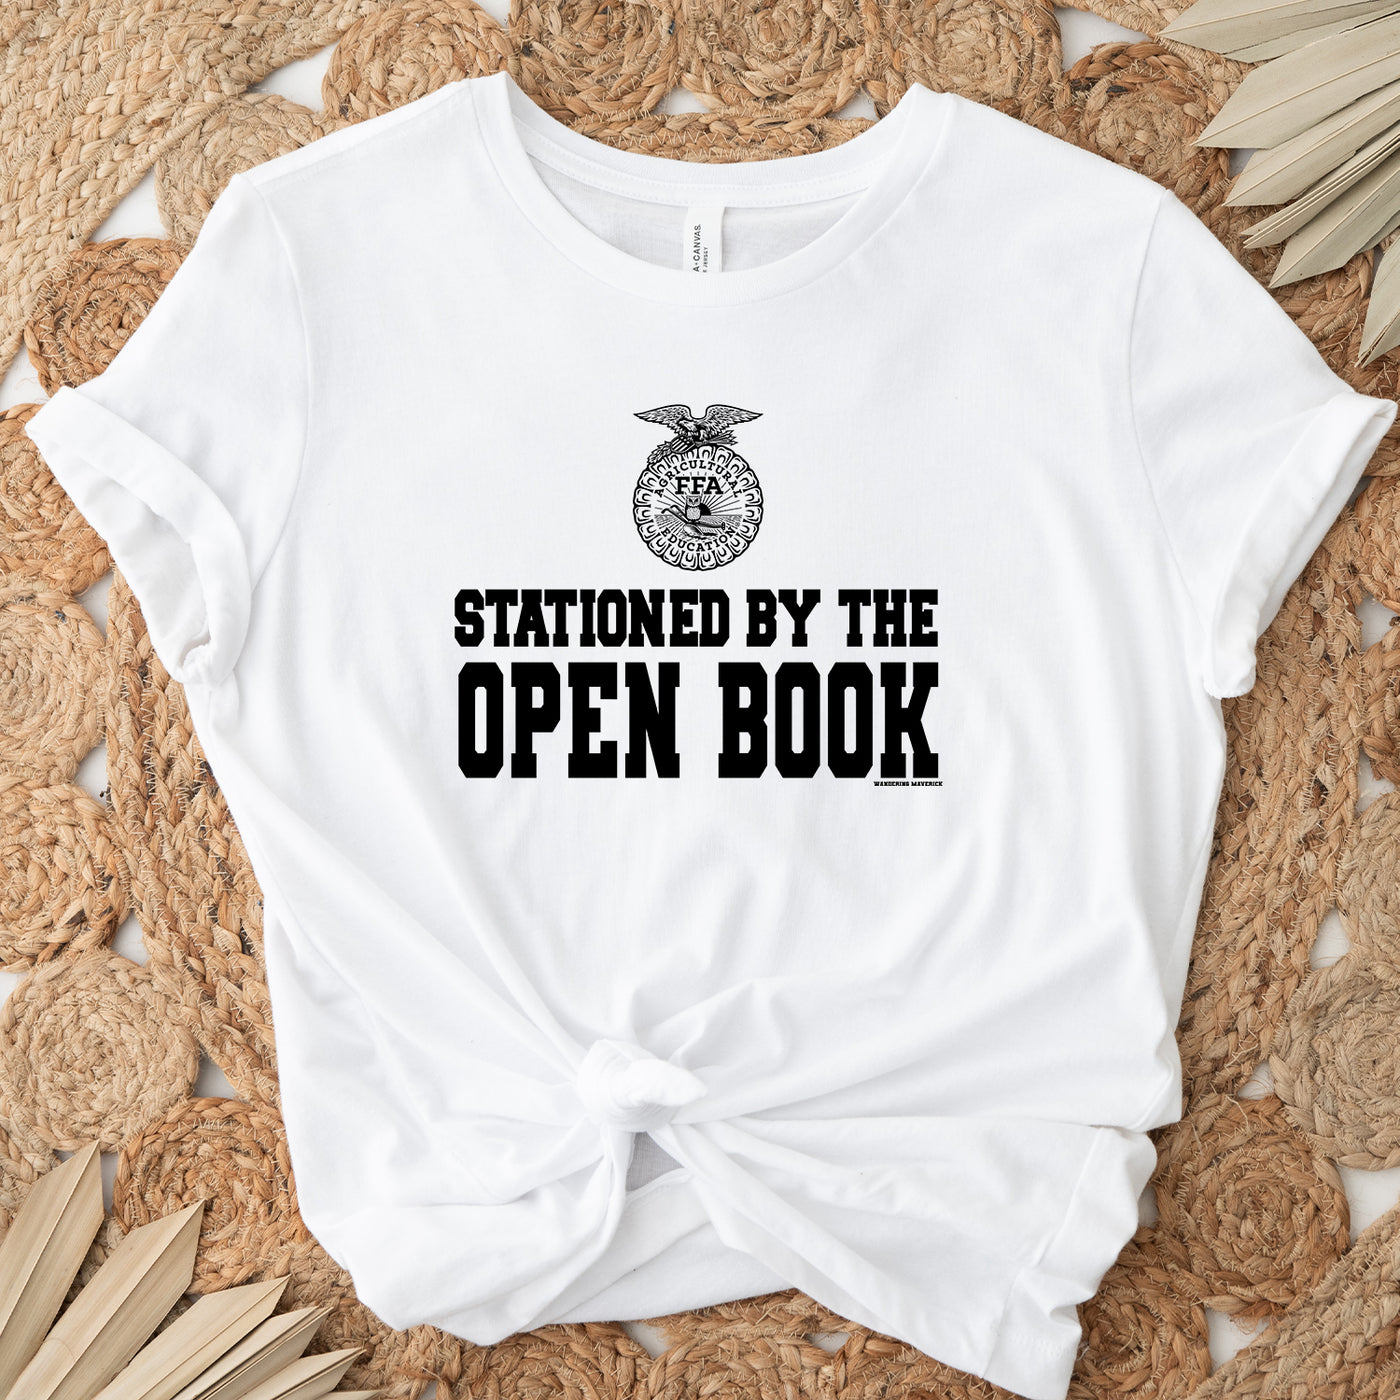 Stationed by the open book ffa T-Shirt (XS-4XL) - Multiple Colors!